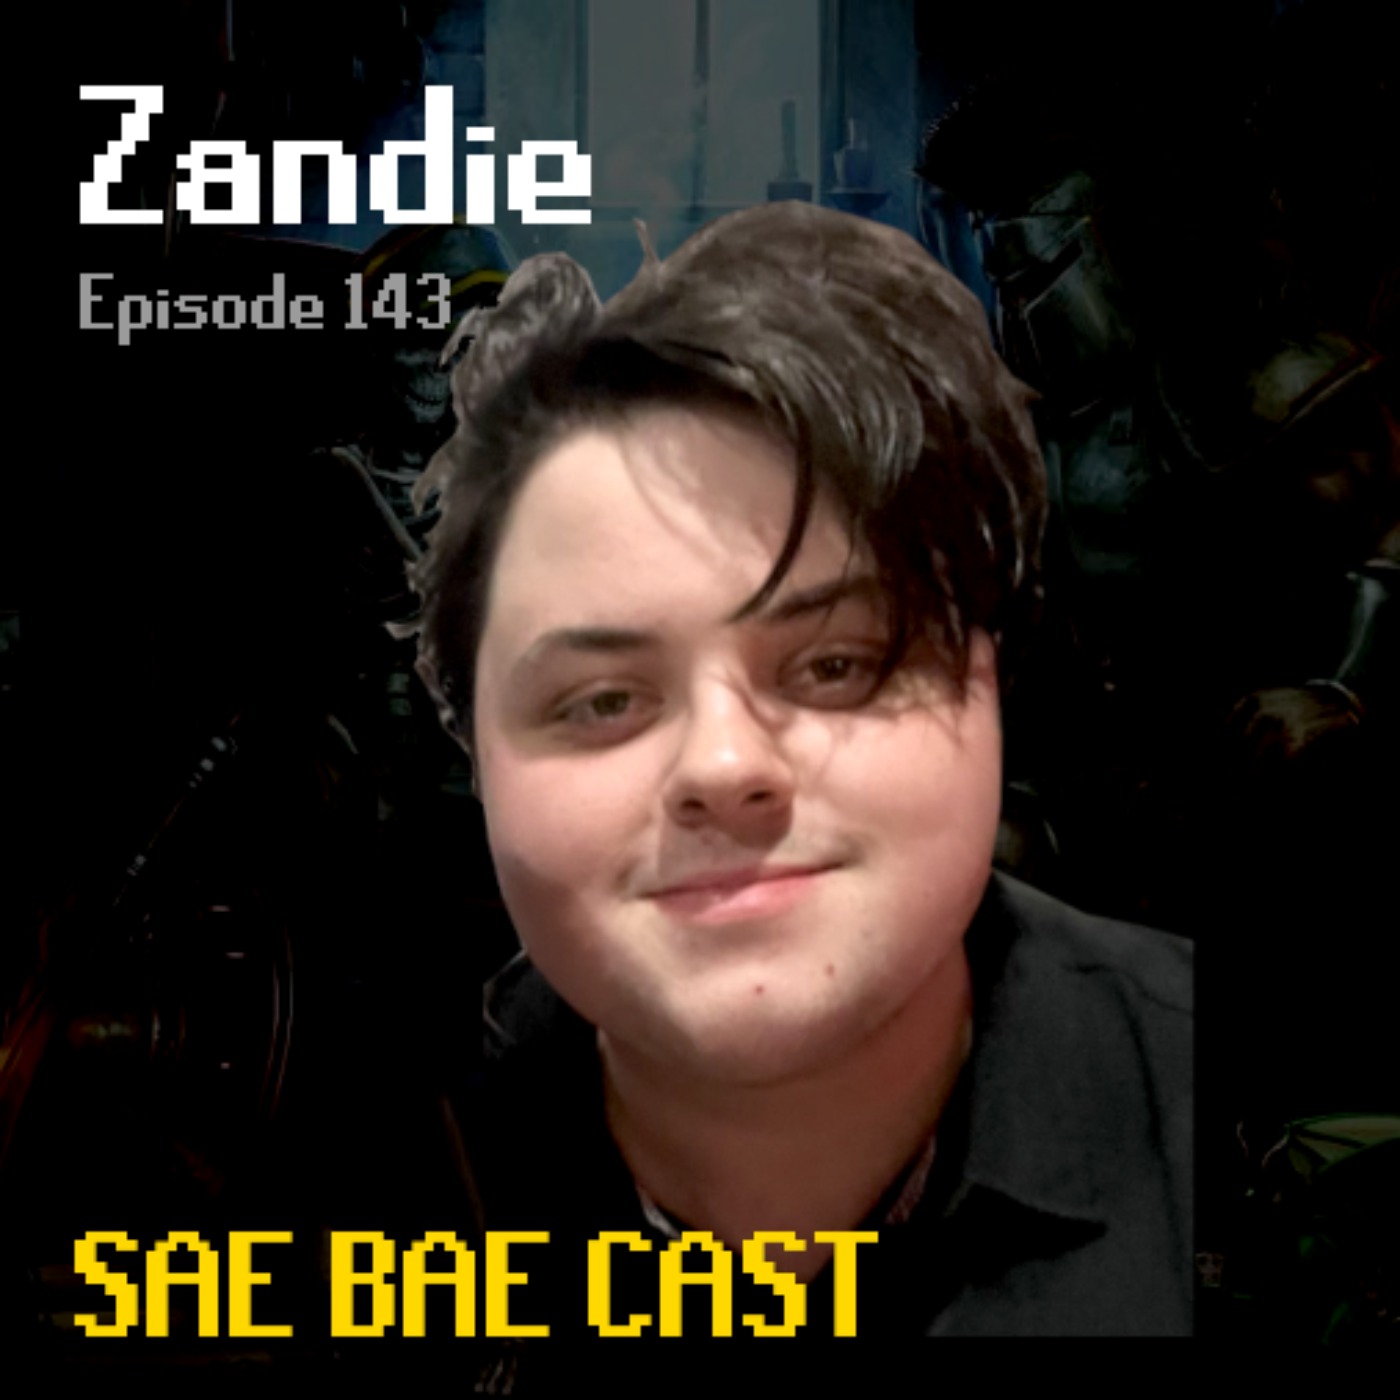 Zandie - Hardstyle, Scythe vs Fang, CoX Mega-scales, Greatest PvMers | Sae Bae Cast 143